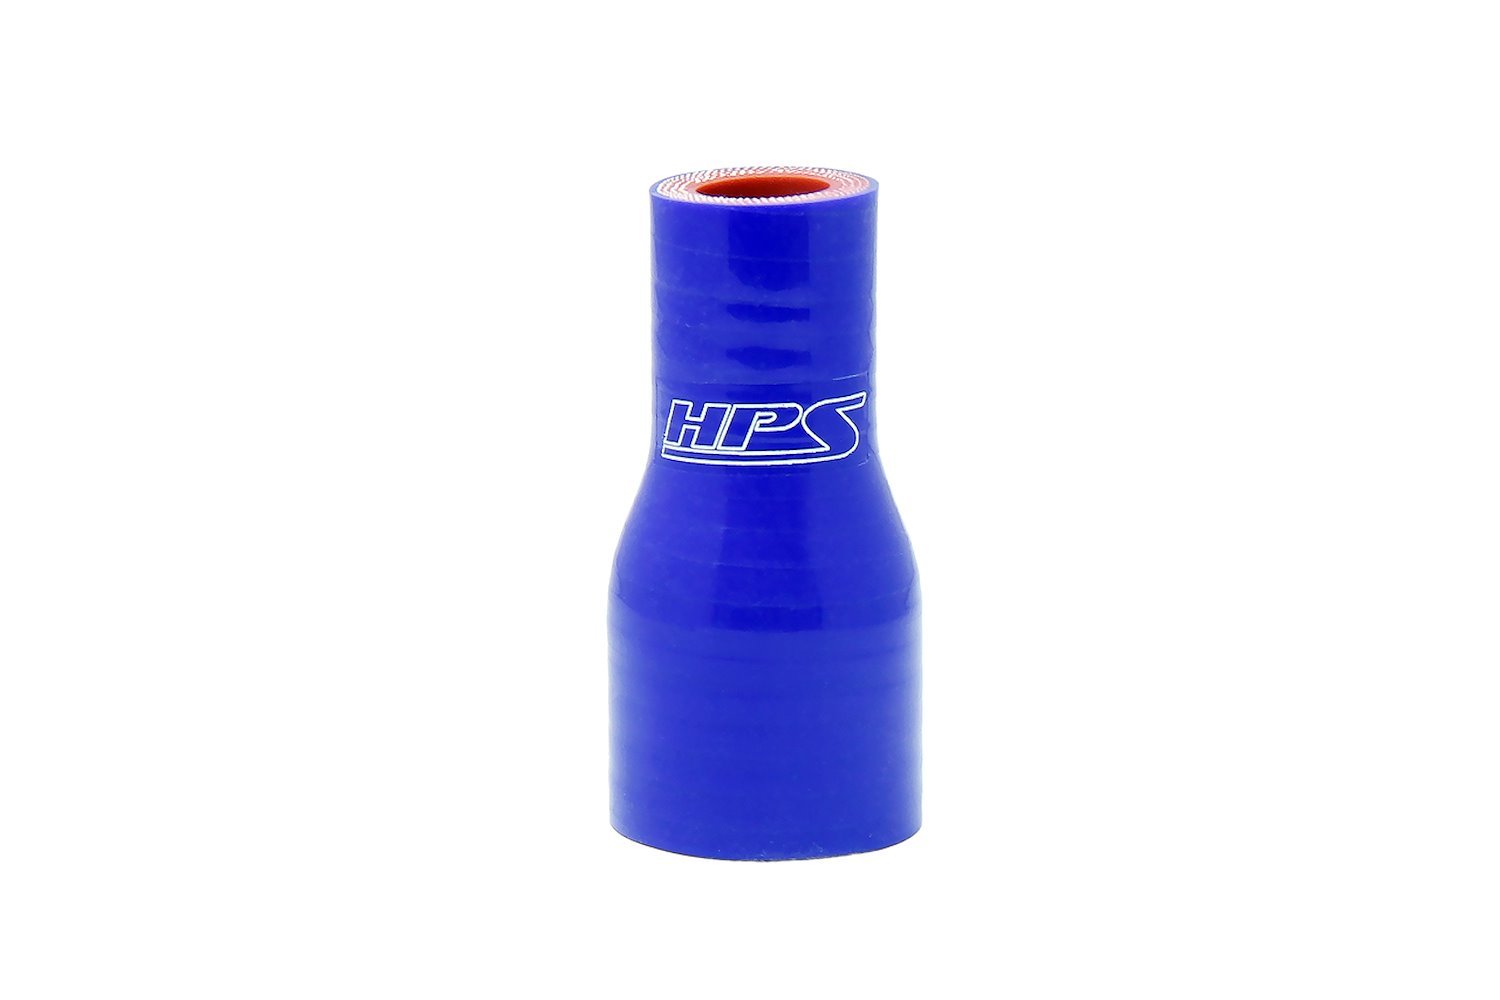 HTSR-125-175-L4-BLUE Silicone Reducer Hose, High-Temp 4-Ply Reinforced, 1-1/4 in. - 1-3/4 in. ID, 4 in. Long, Blue